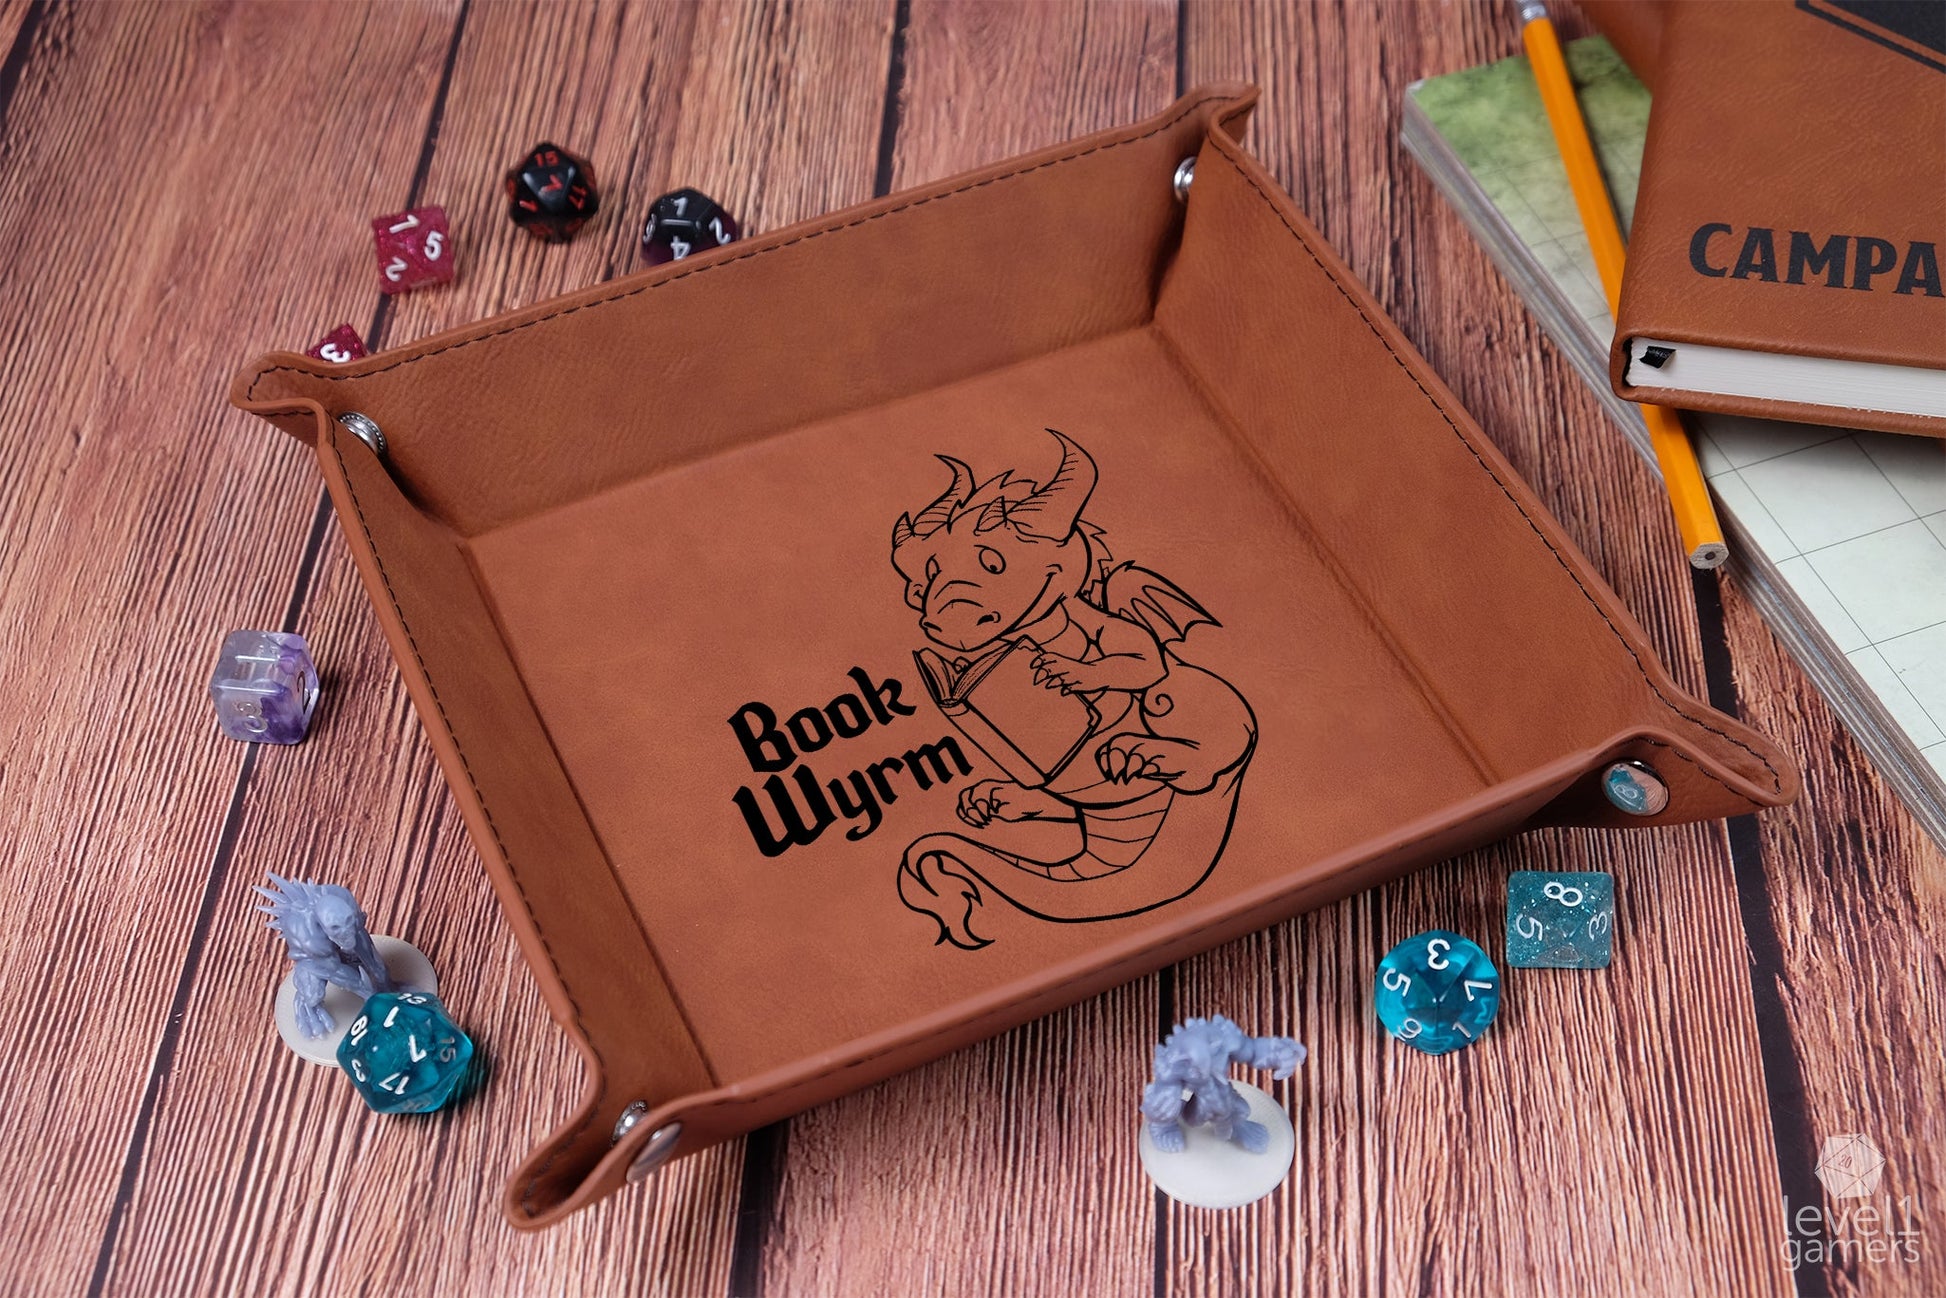 Book Wyrm Dice Tray Dice Trays Level 1 Gamers   